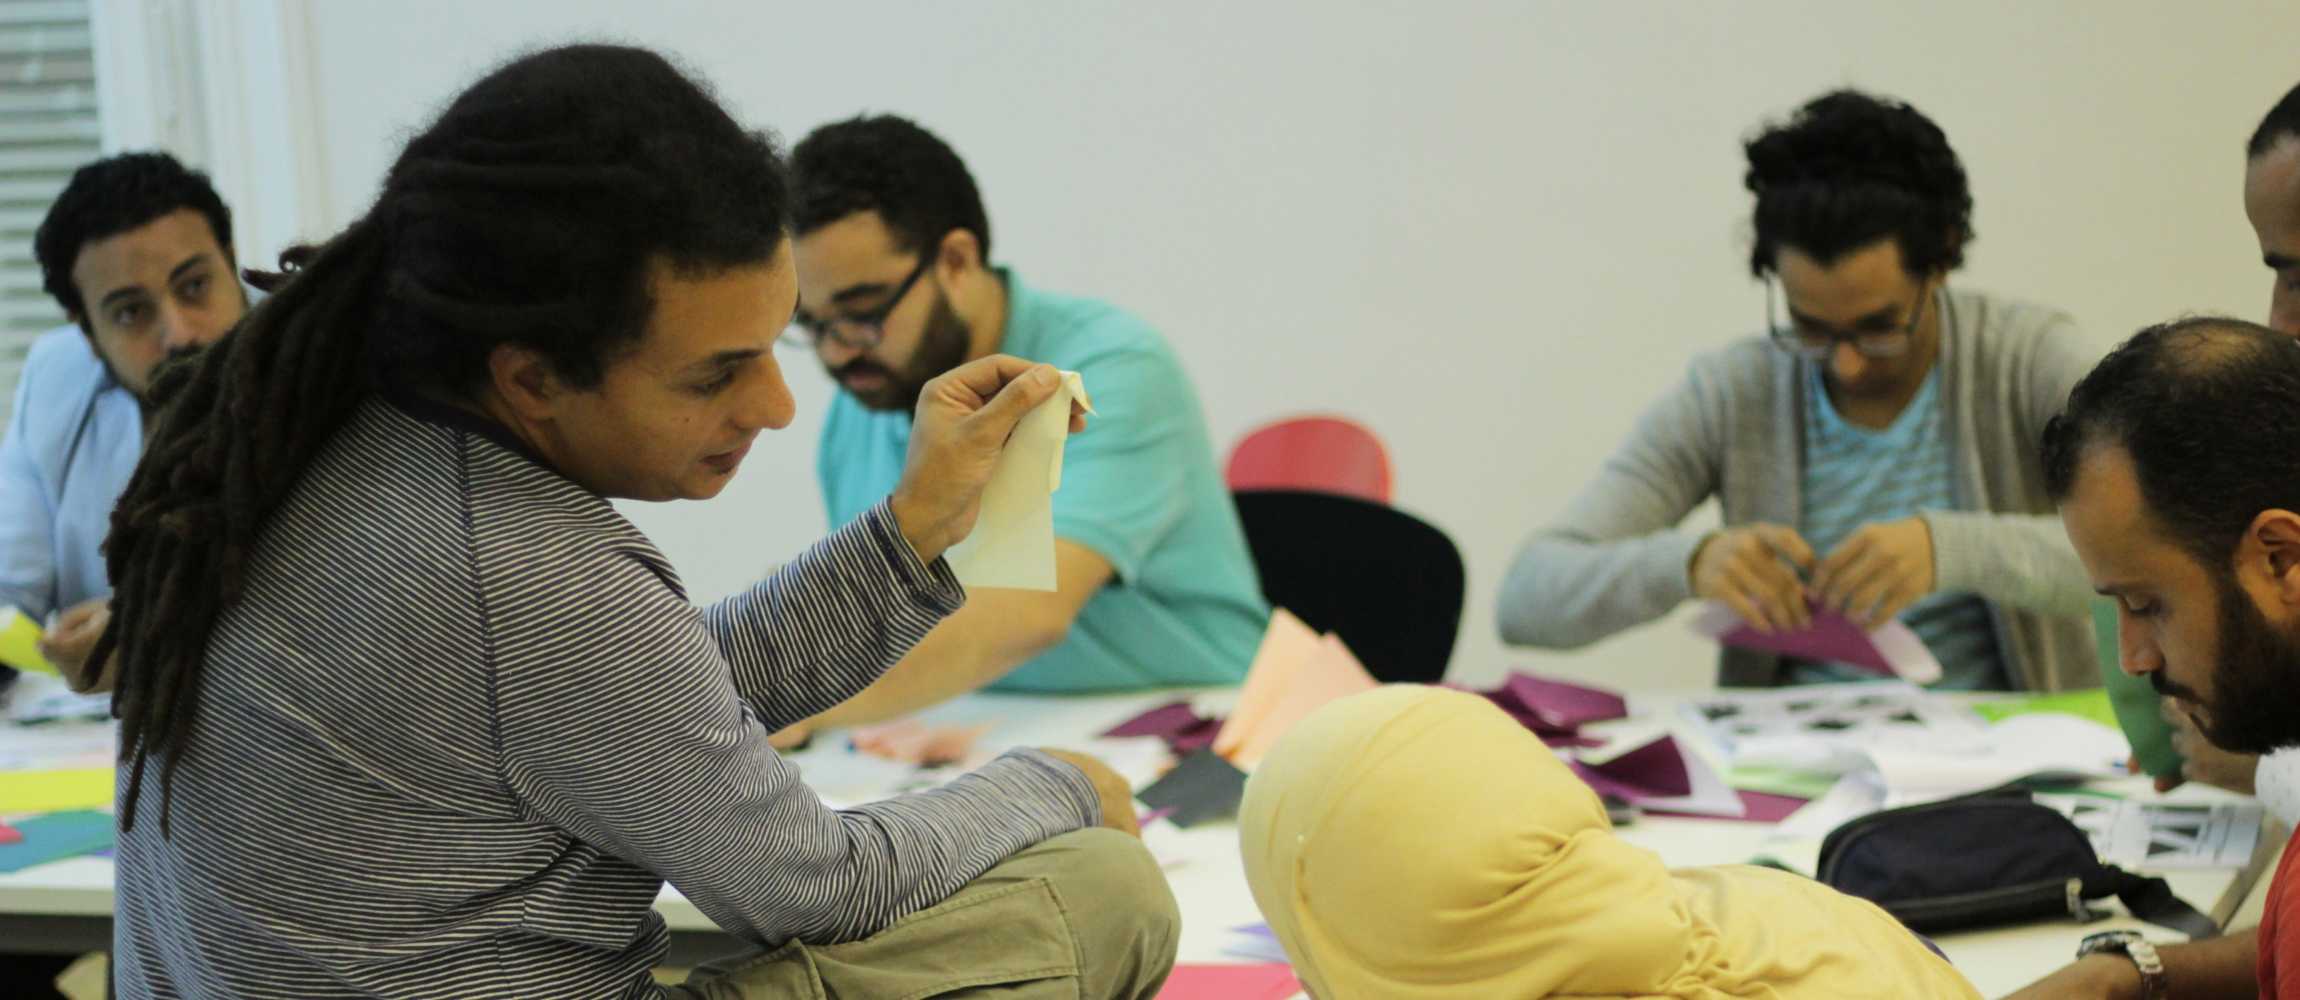 As part of the Alumni Exchange Program, Osama Helmy conducted an origami workshop at the Goethe-Institut Cairo.